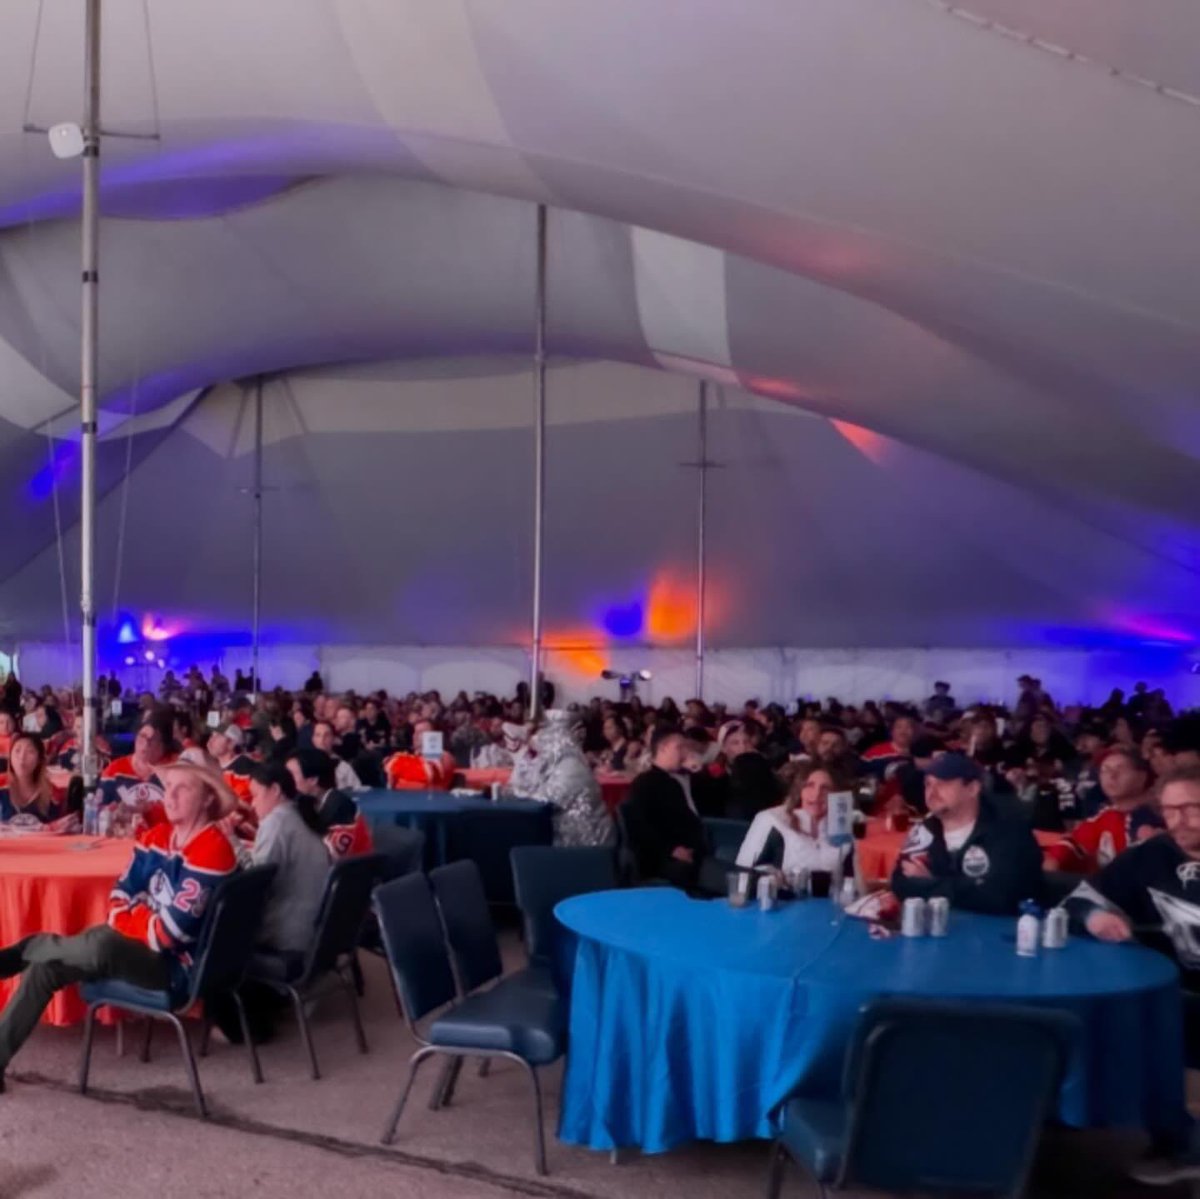 🧡💙 It’s crunch time for the boys tonight! They're back home, let’s rally and show them the power of #OilersNation 🎉 Join us in our Playoff watch party tent! ✨ We have commercial heaters to stay warm! Tickets for Game 6 are ON SALE NOW! Just $25, your ticket includes our